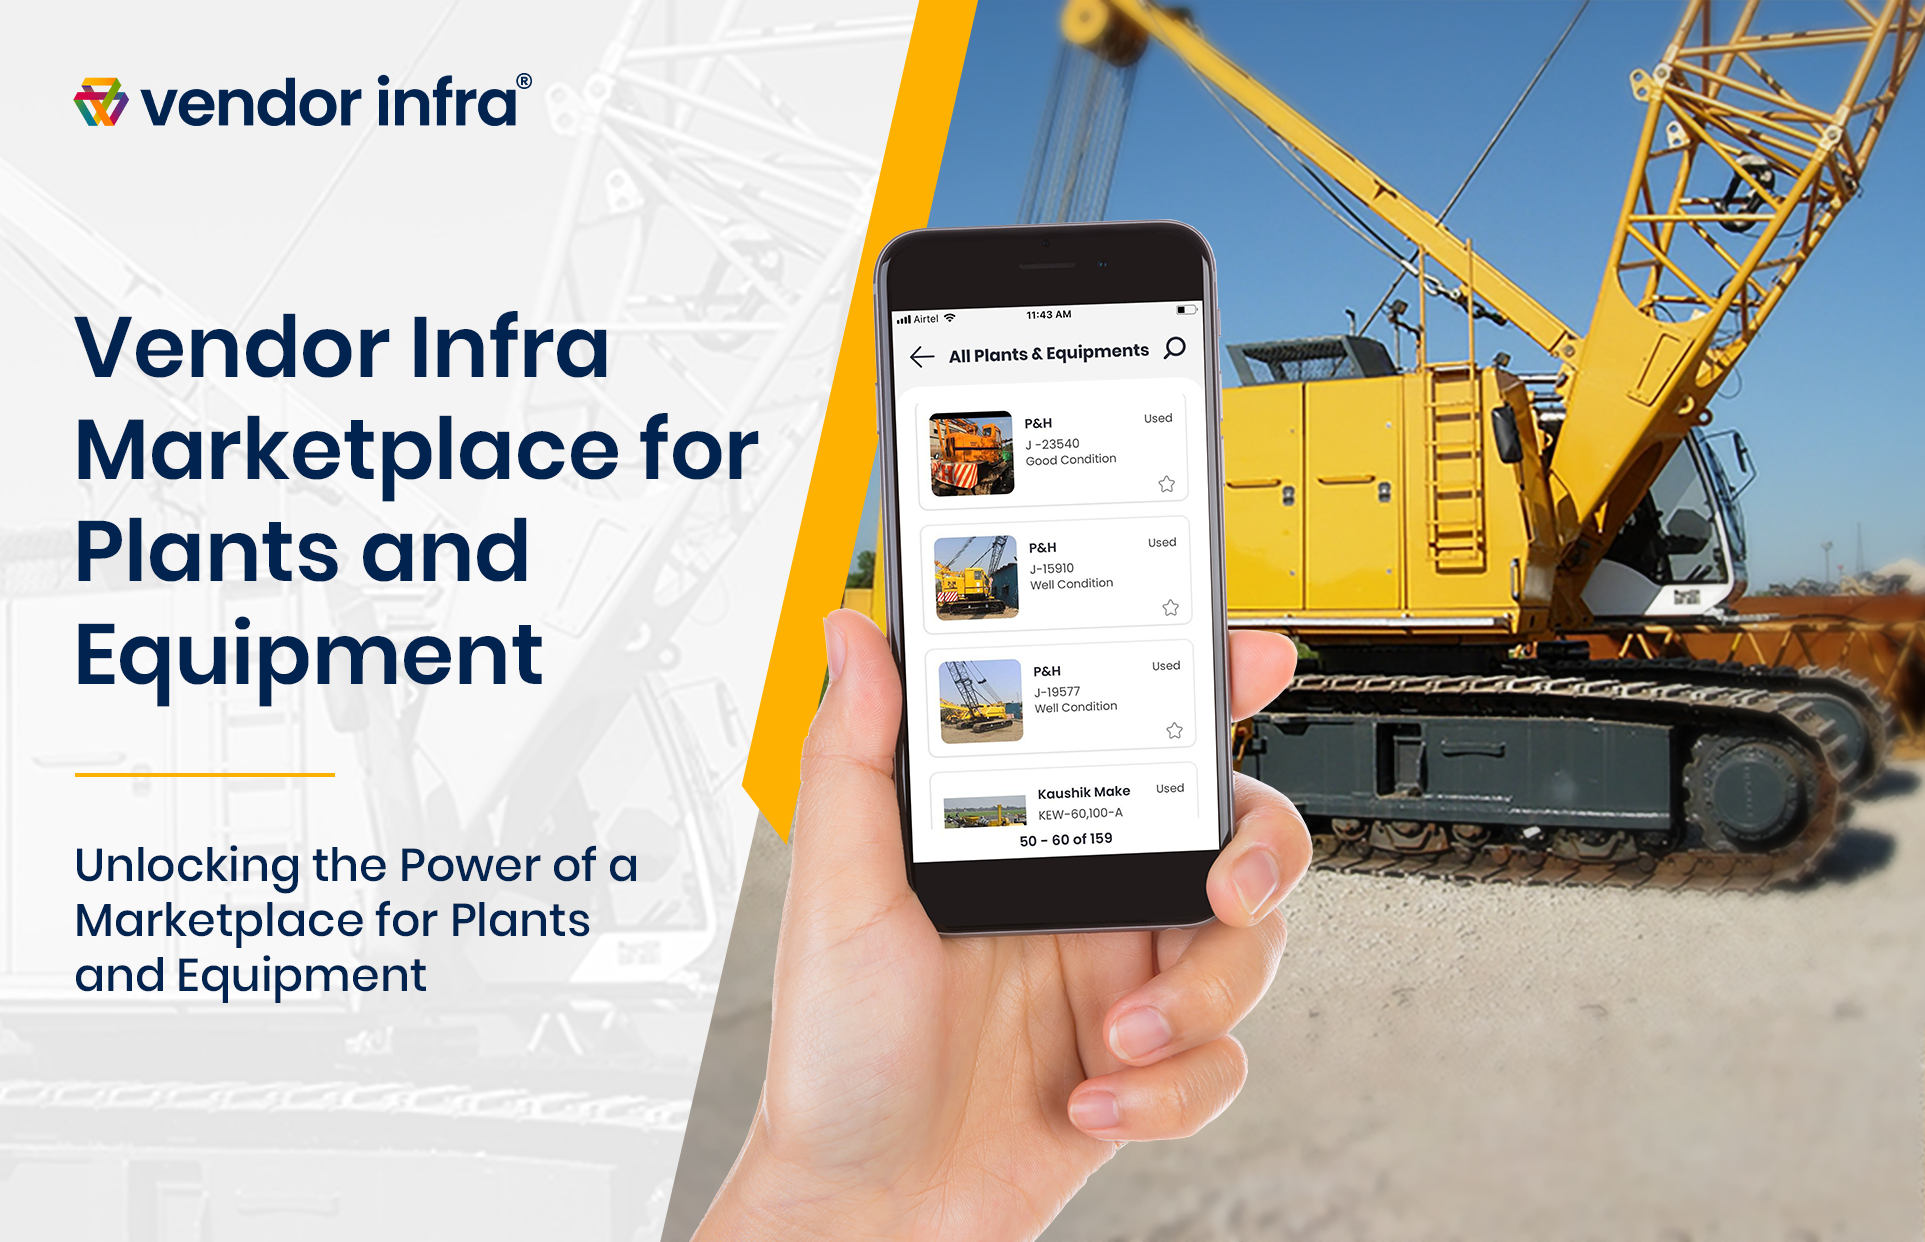 Vendor Infra Marketplace for Plants and Equipment